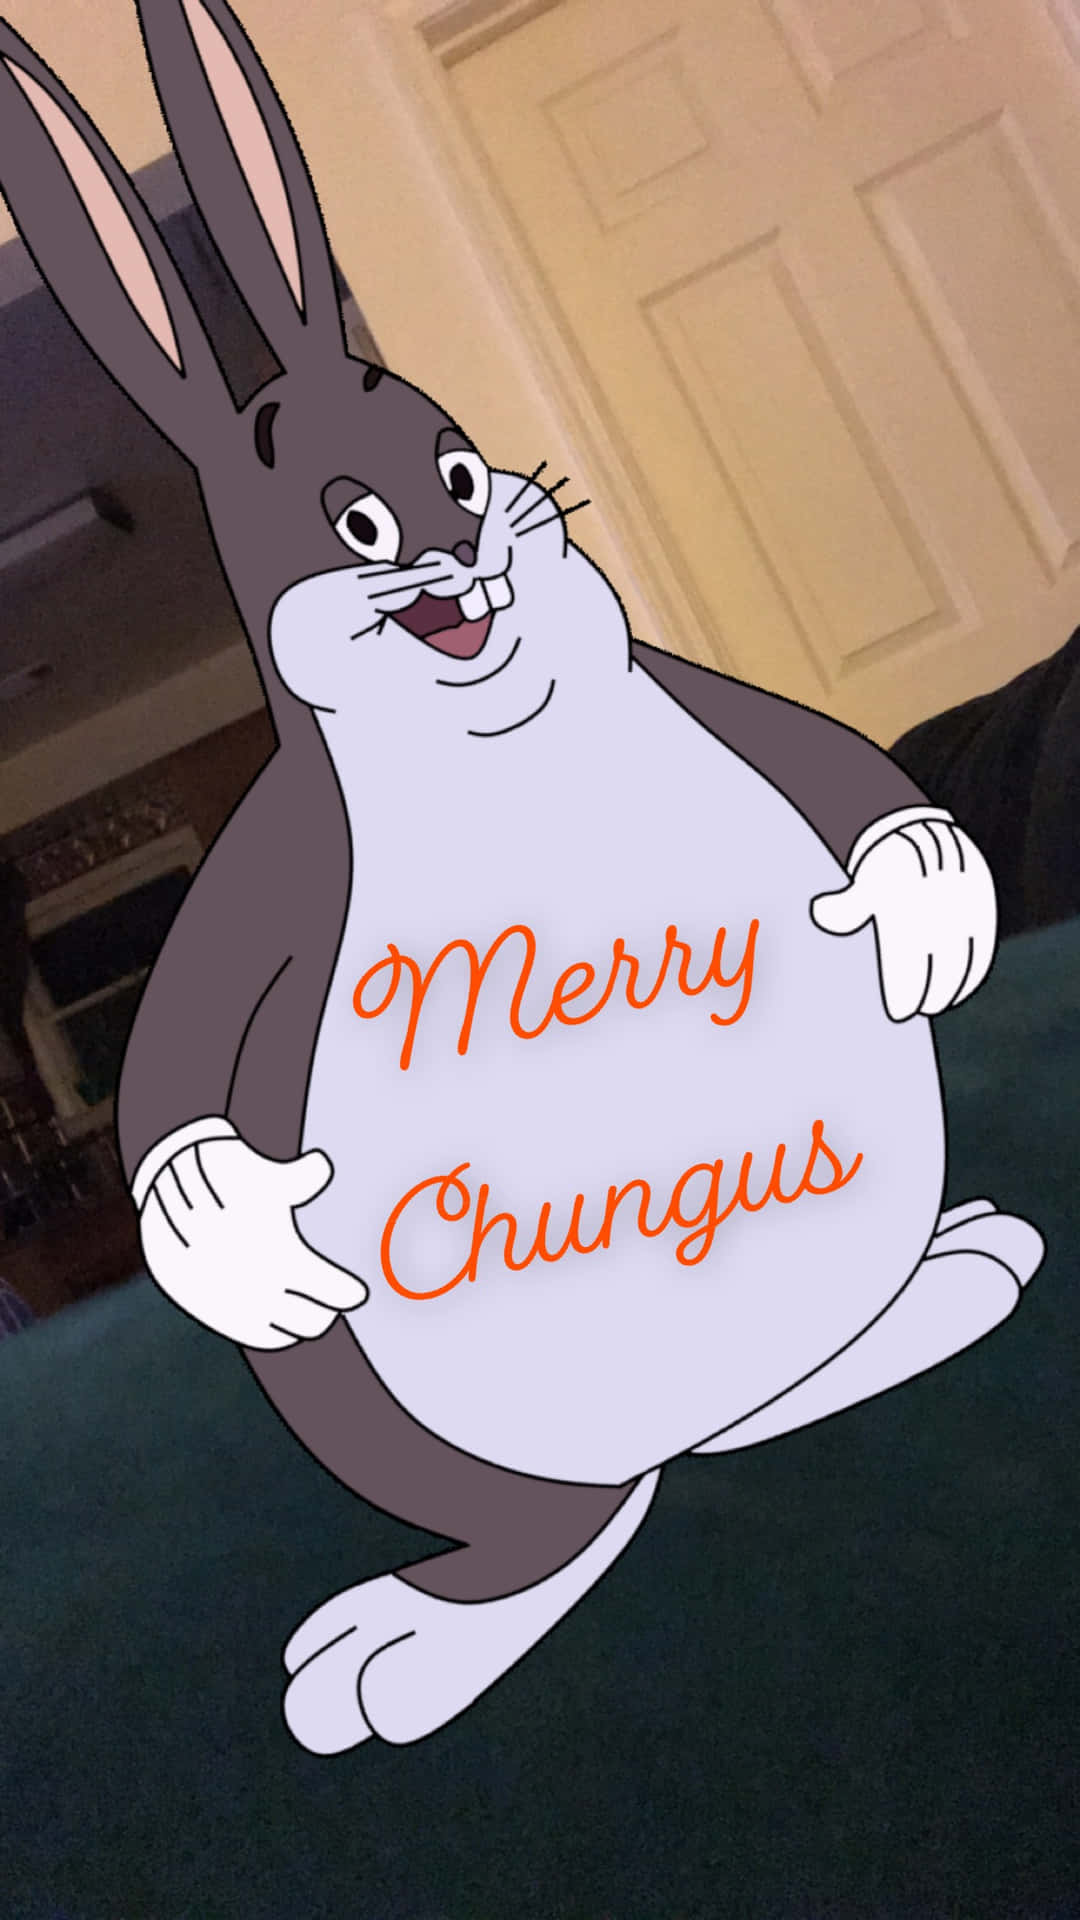 A Cartoon Rabbit With The Words Merry Chuggies